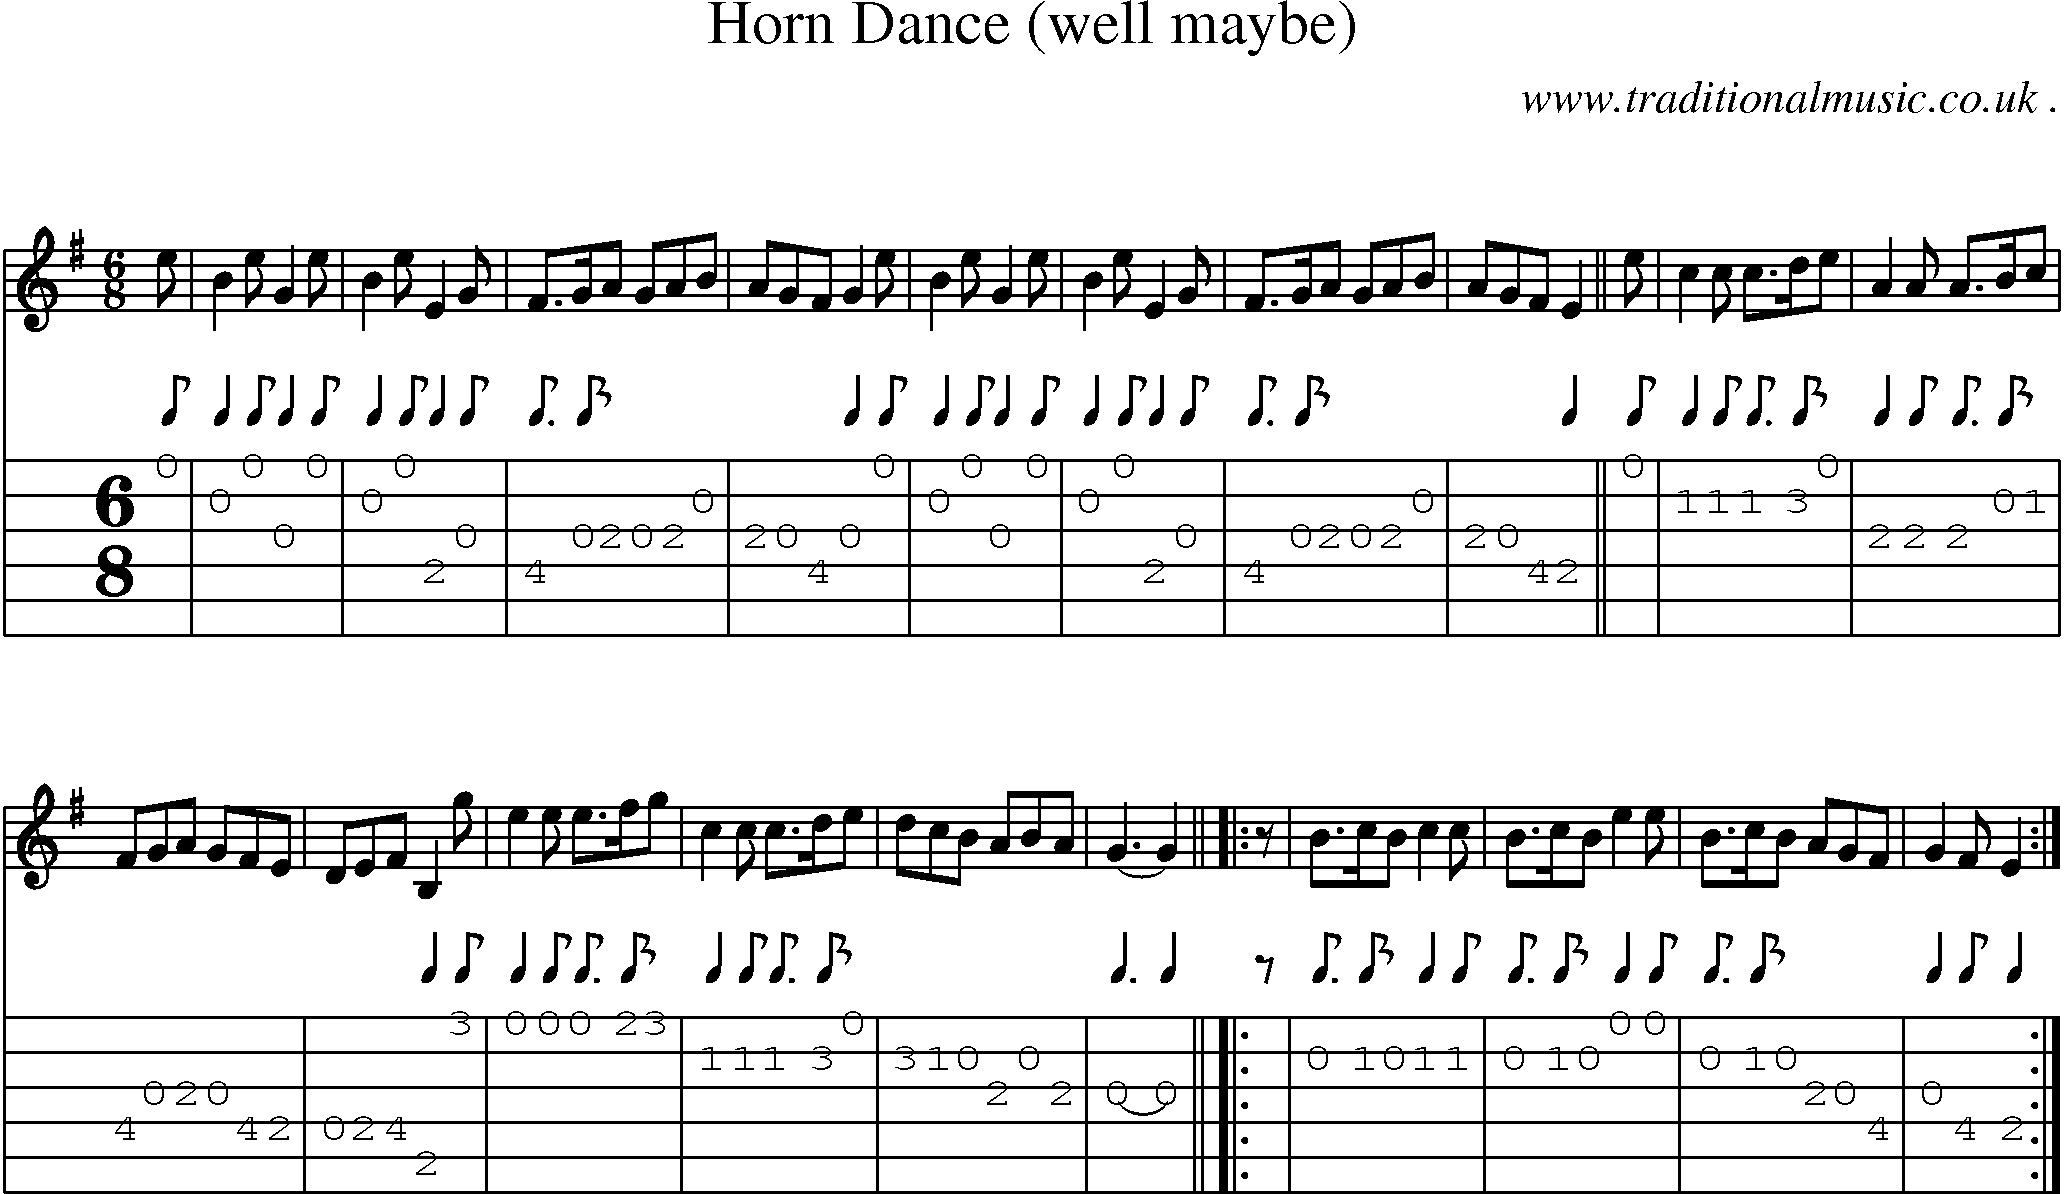 Sheet-music  score, Chords and Guitar Tabs for Horn Dance Well Maybe